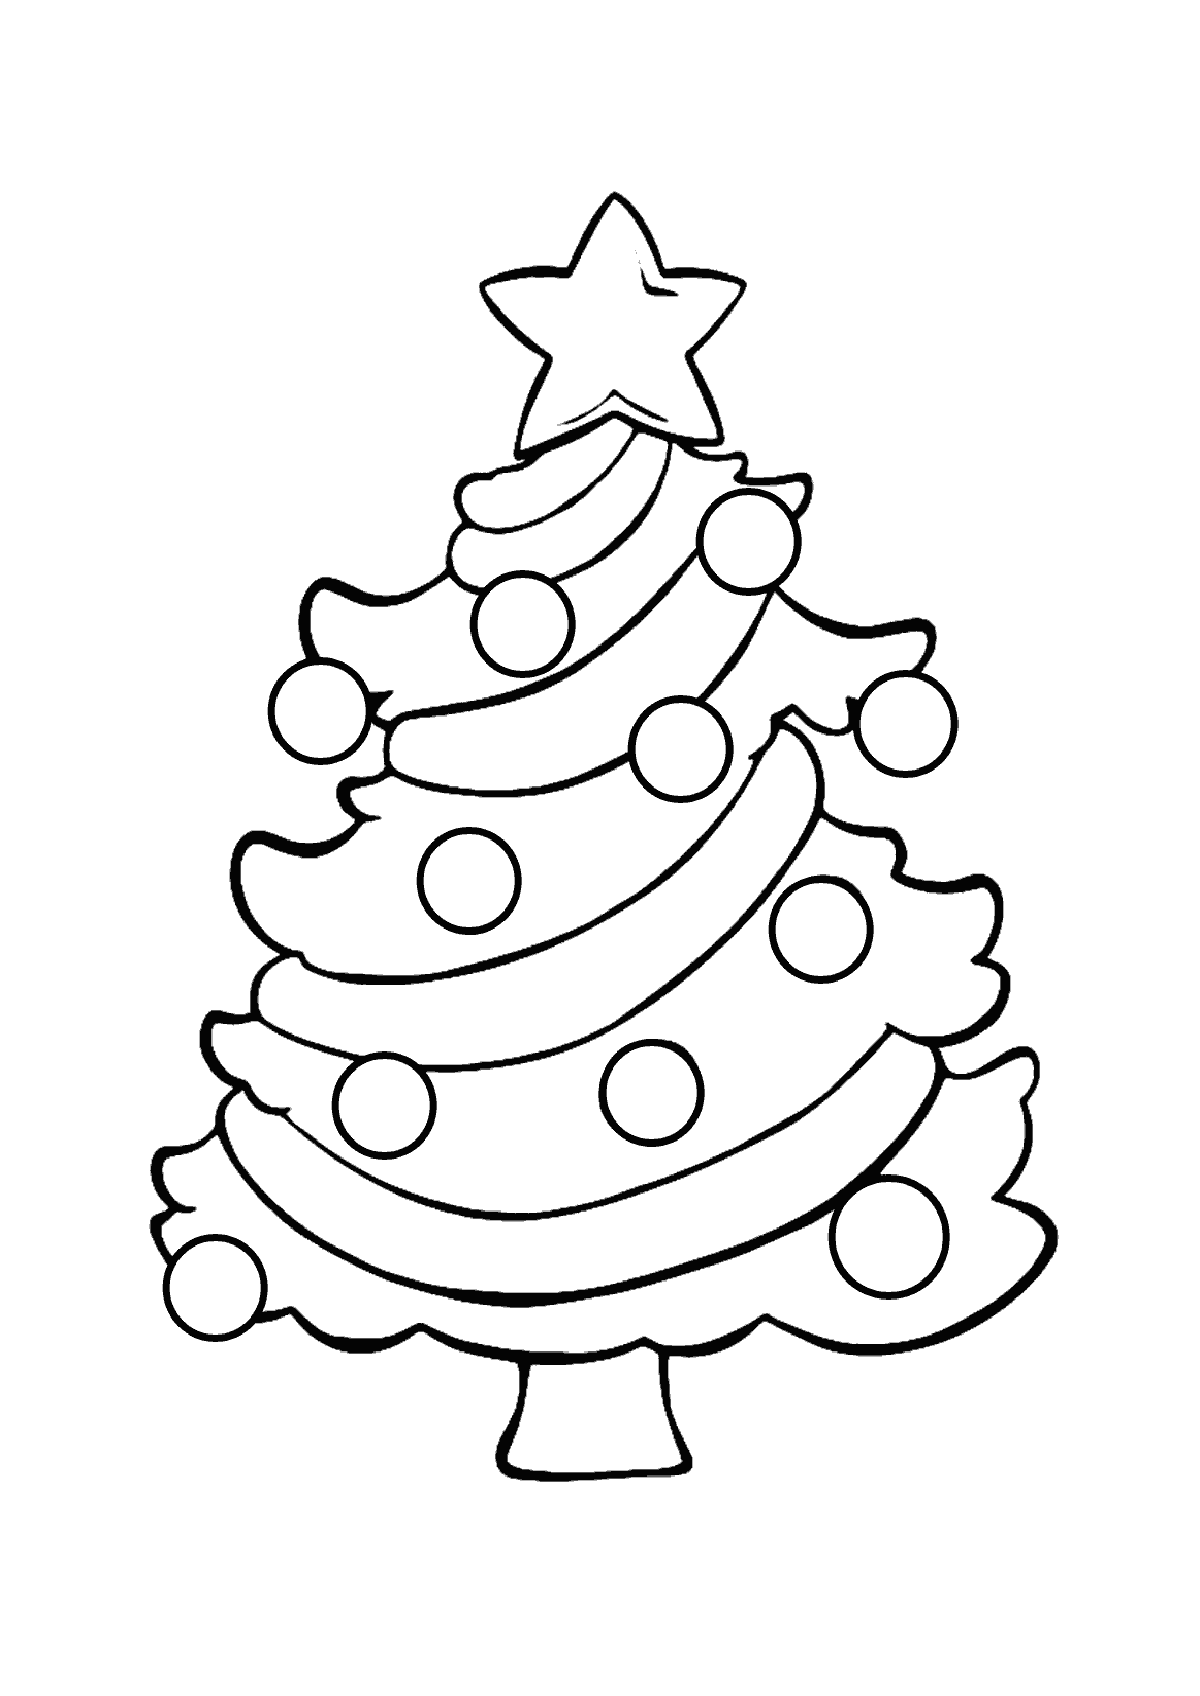 coloring christmas tree christmas tree drawing for kids at getdrawings free download christmas tree coloring 